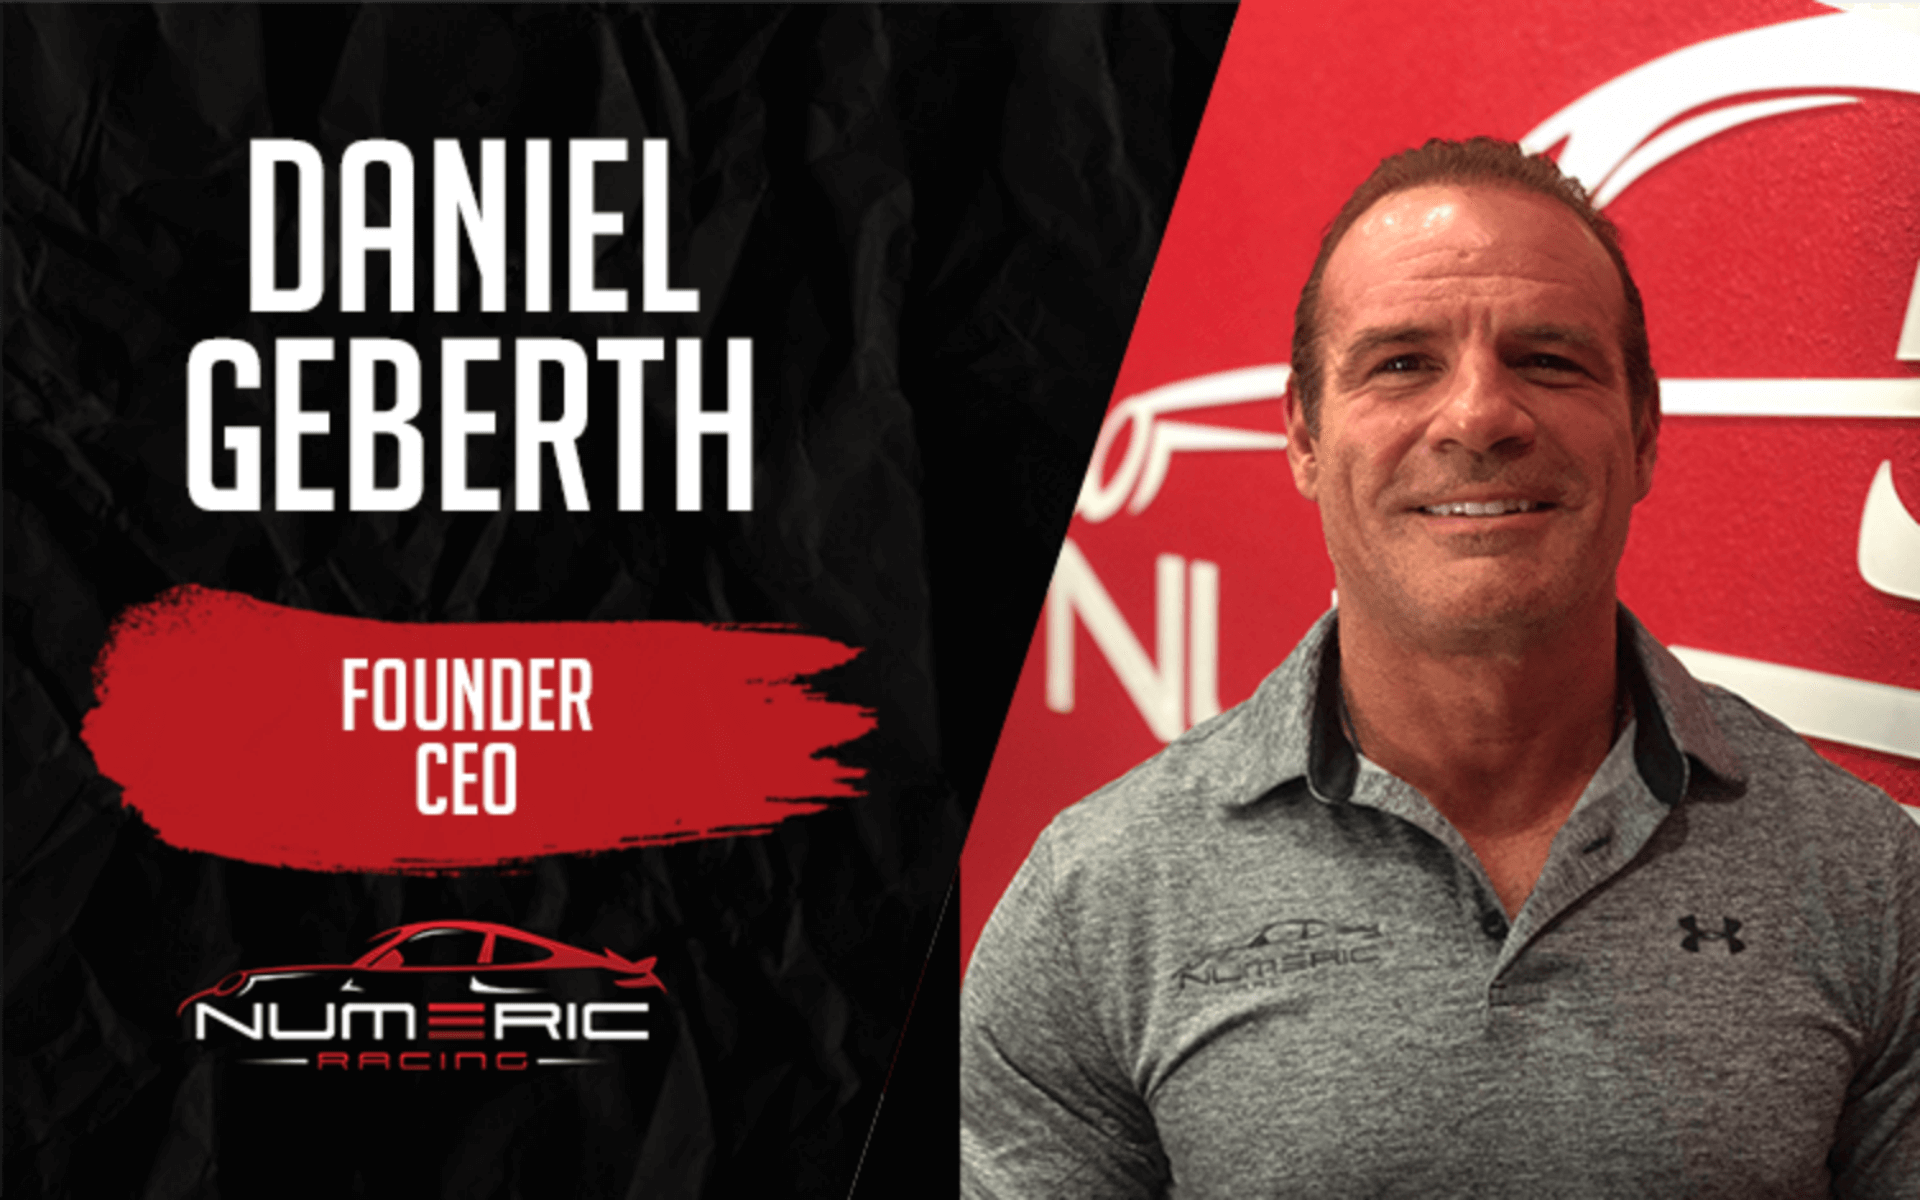 Image of our founder Daniel Geberth